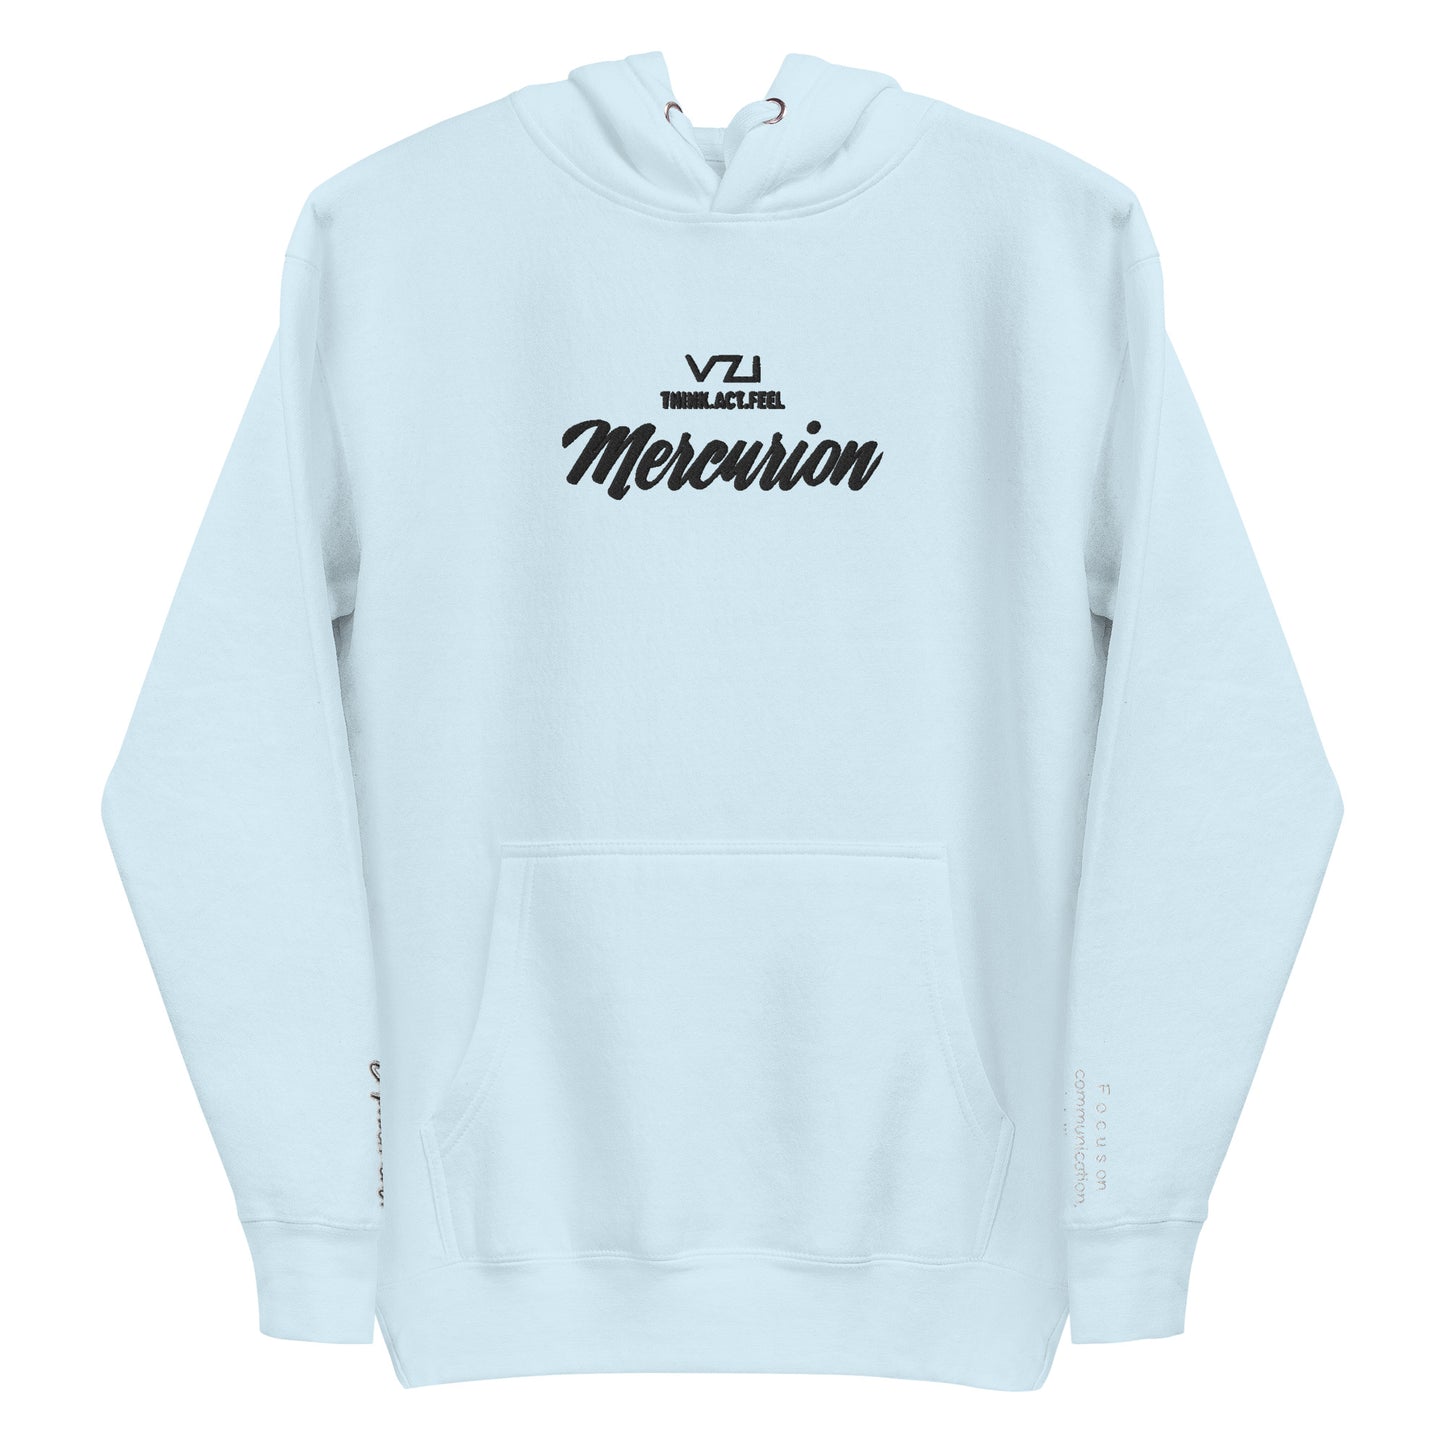 Mercurion: Men's Hoodie, Classic Cotton: Focus on communication, intelligence, and agility.(Empowerment)